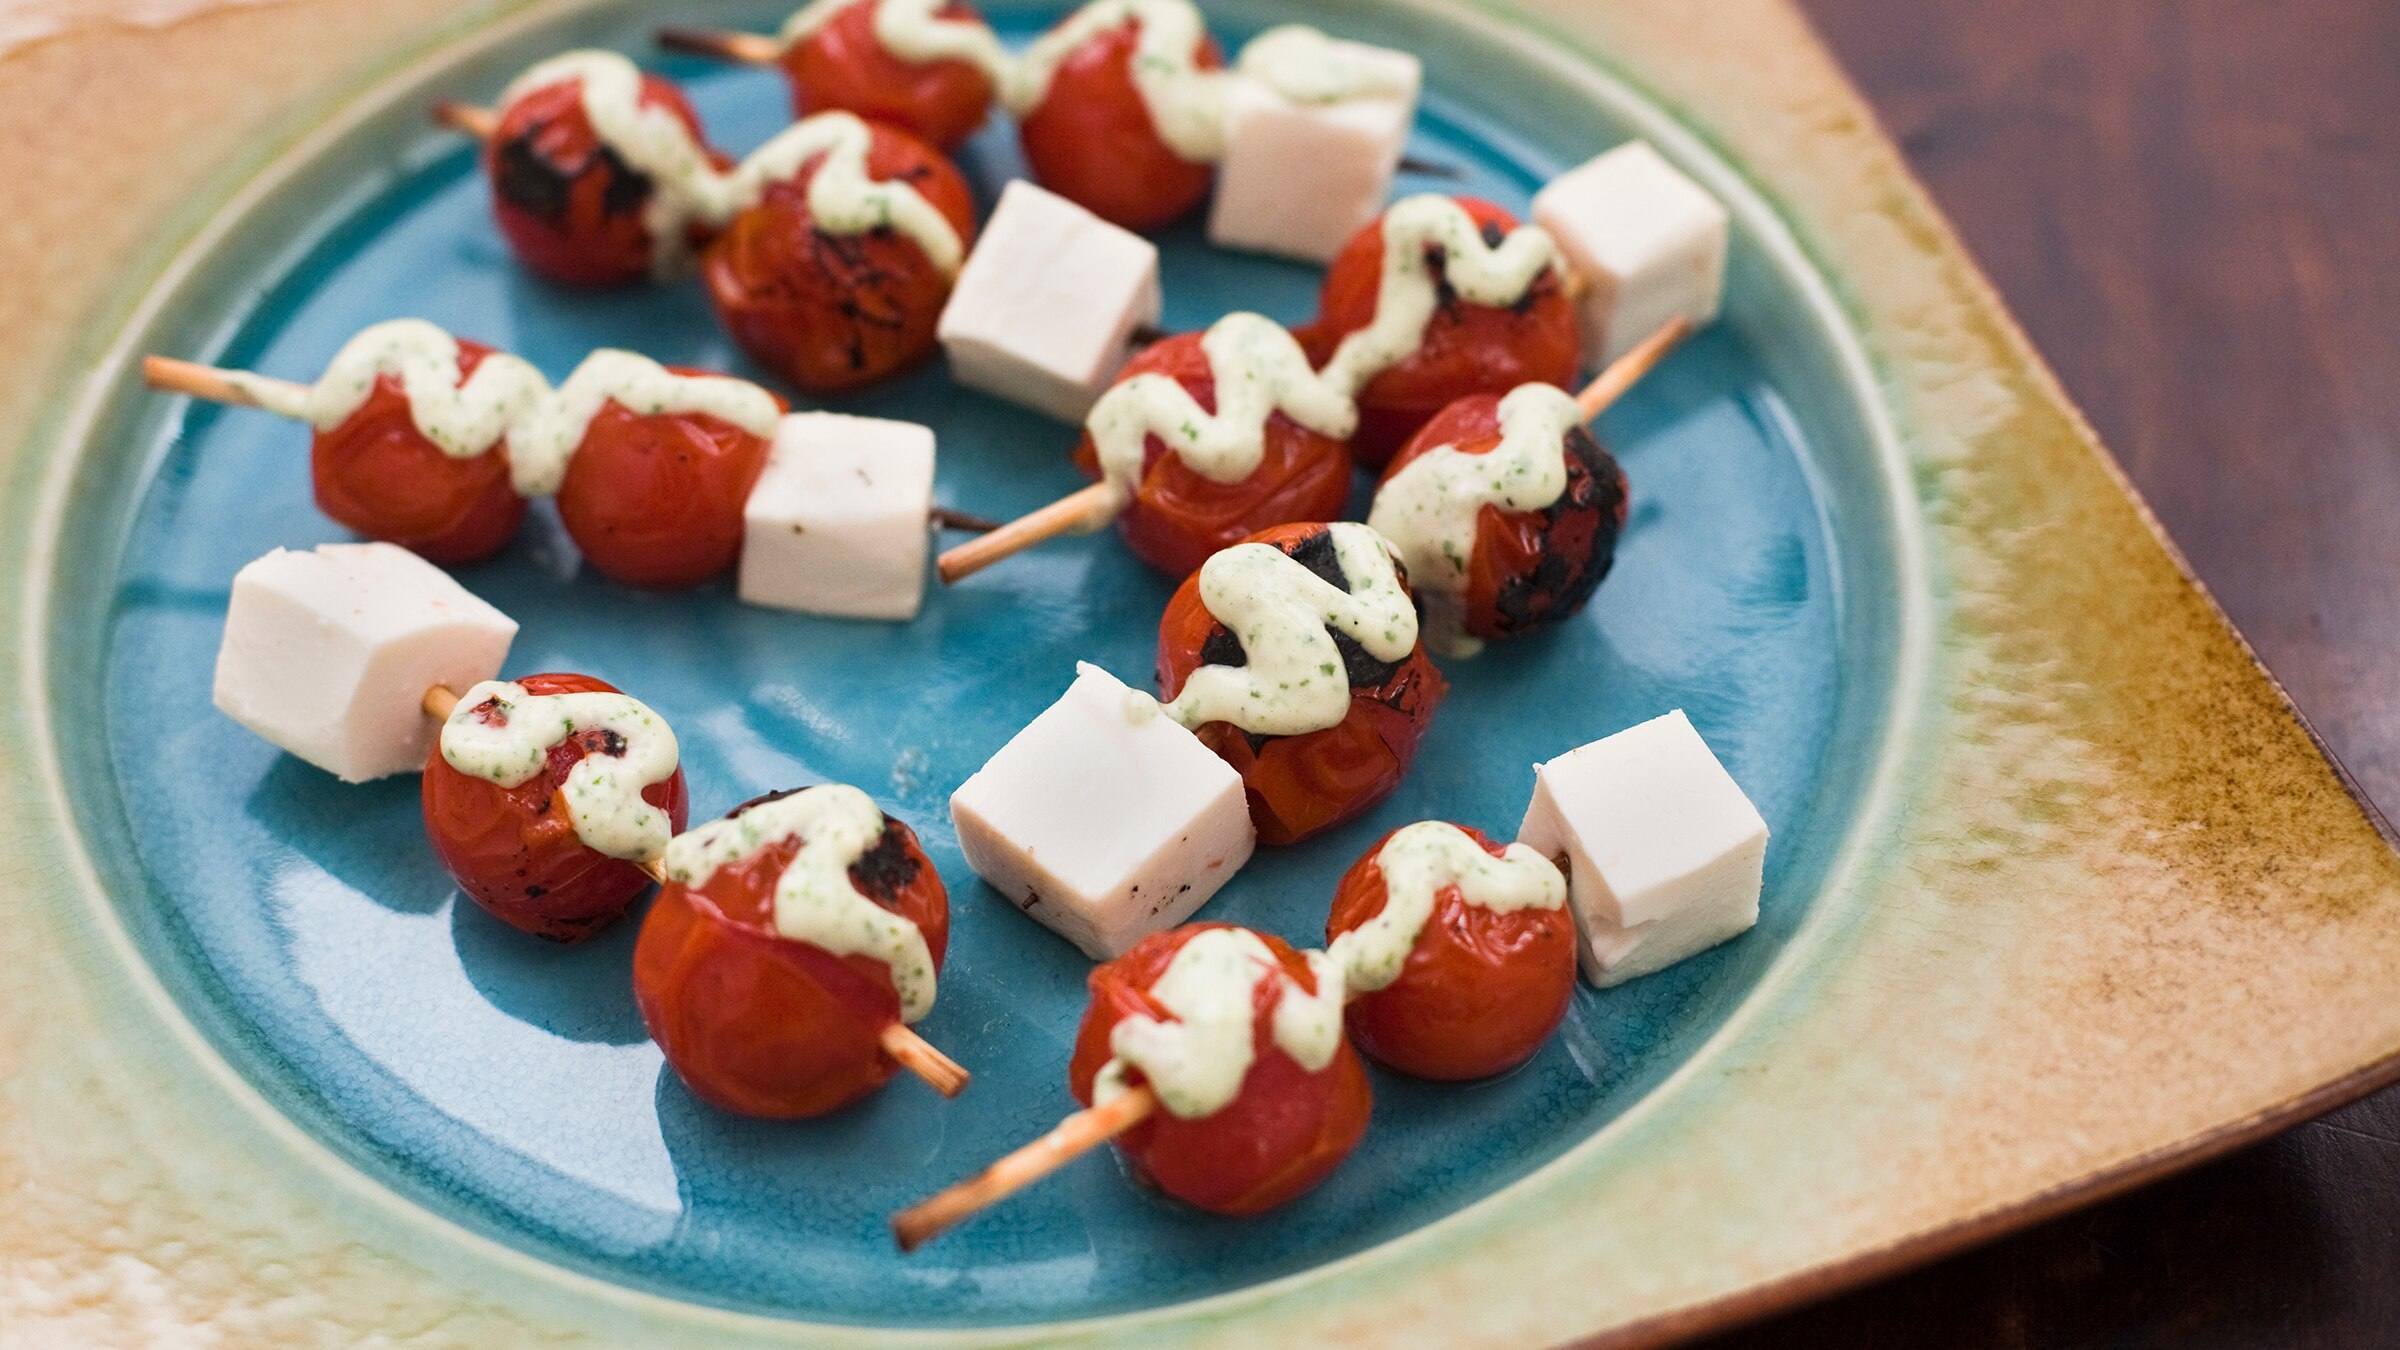 Broiled Cherry Tomato Skewers with Basil Dressing